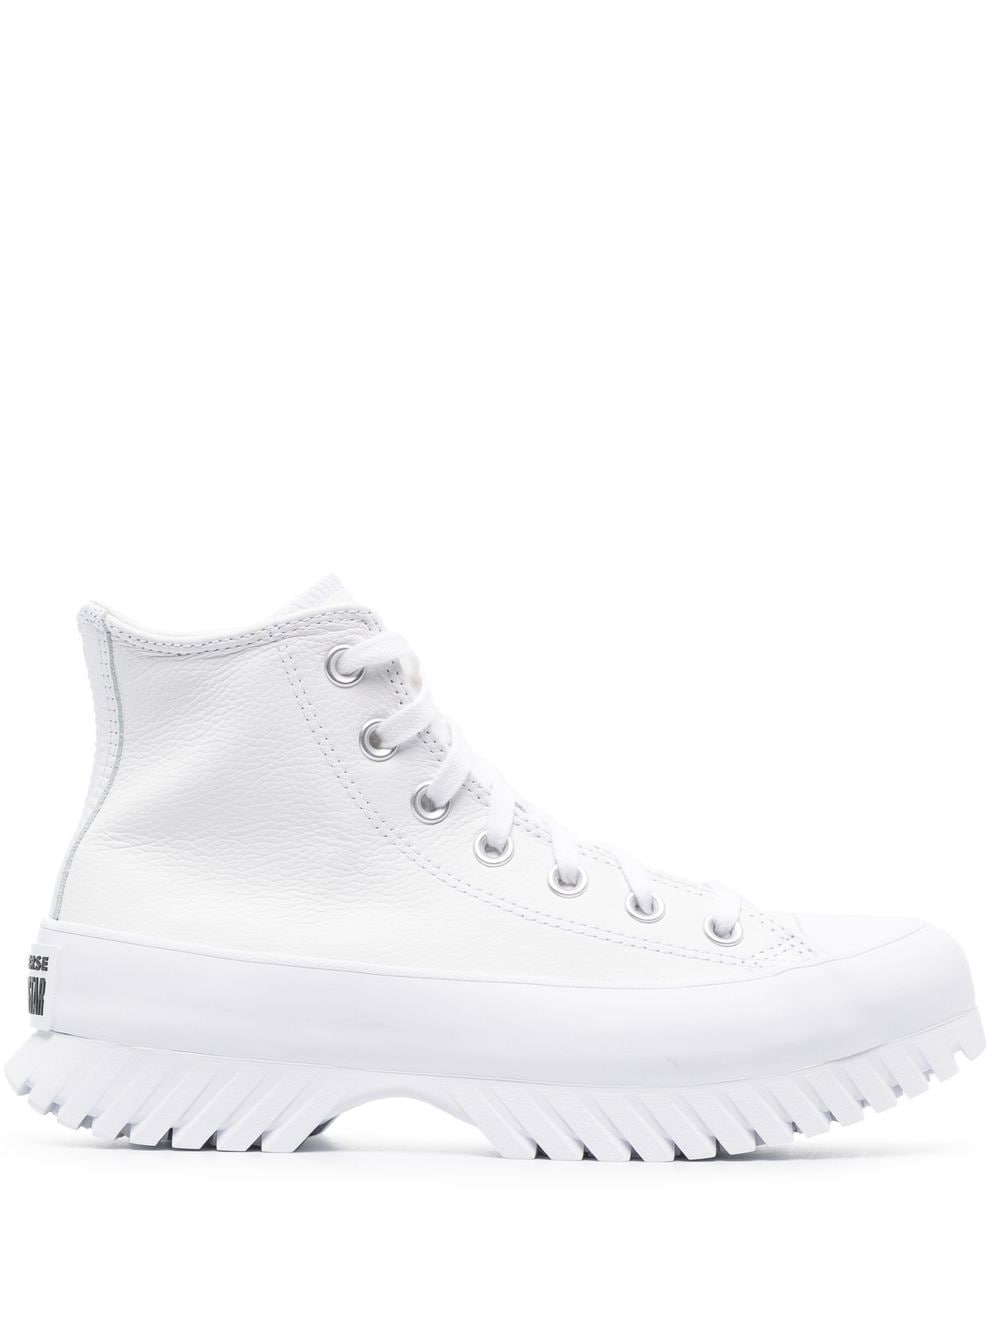 Converse Chuck Taylor Lugged 2.0 sneakers - White von Converse